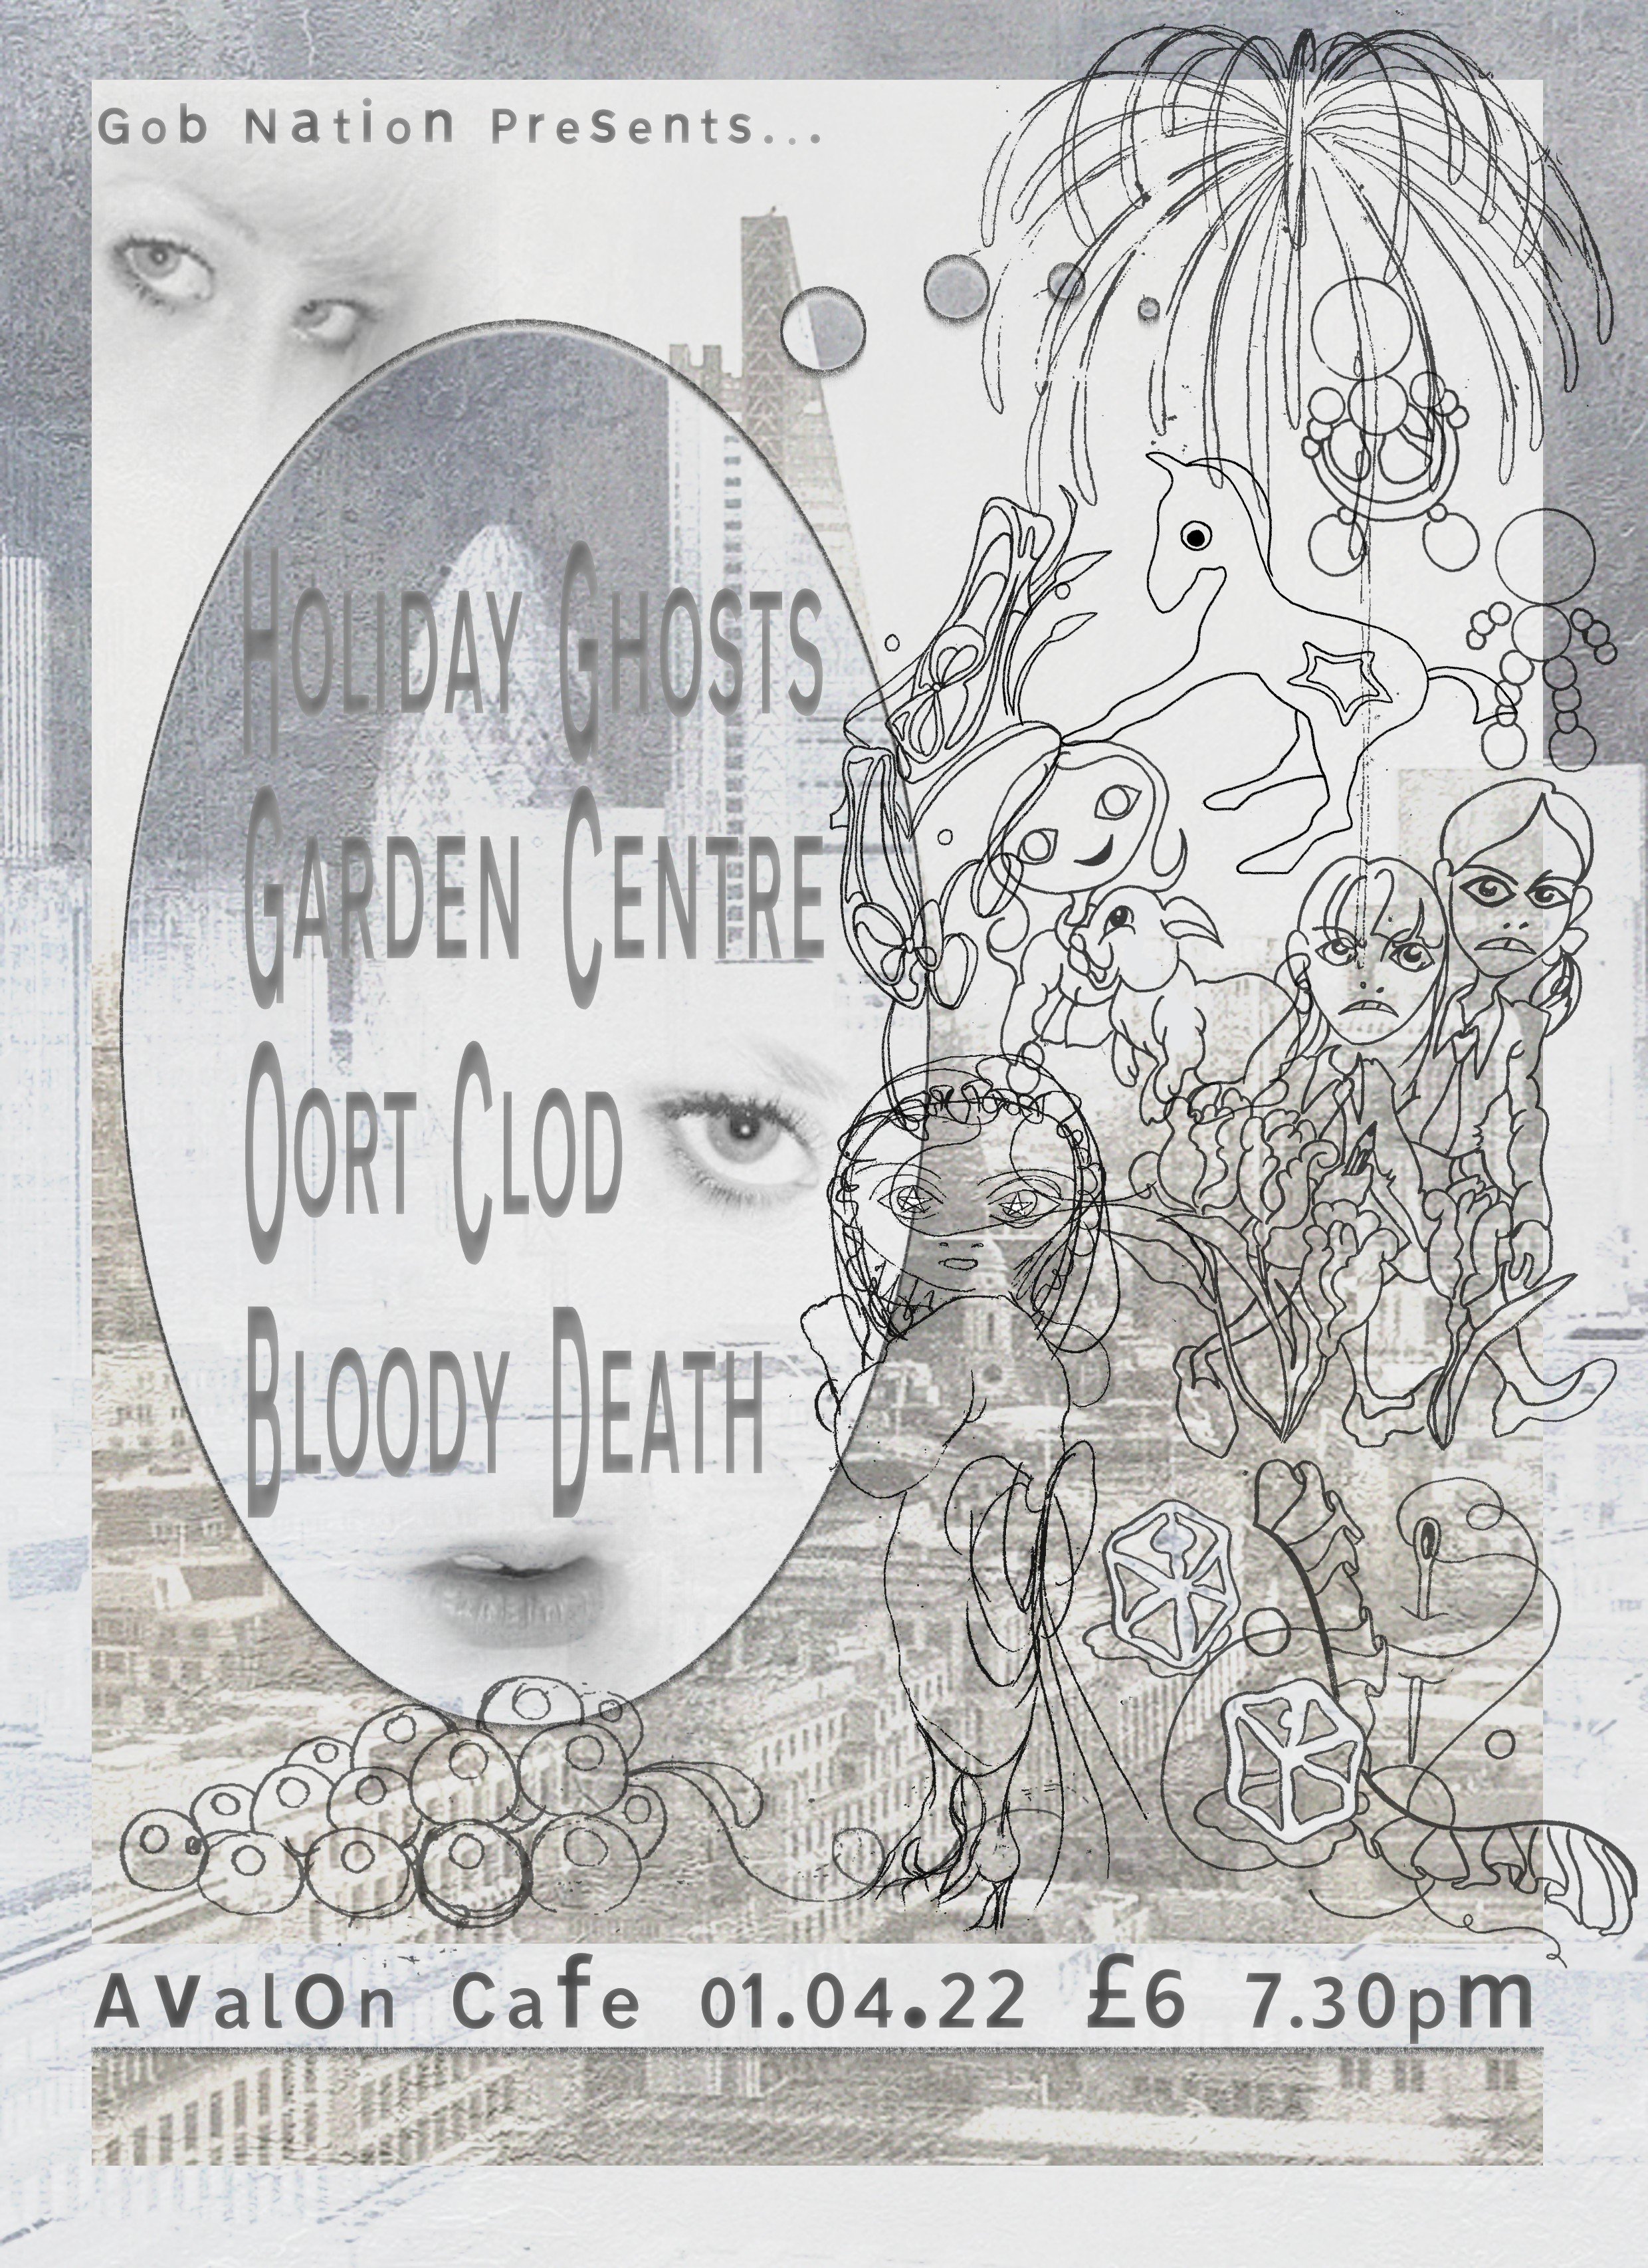 holiday ghosts poster.jpg